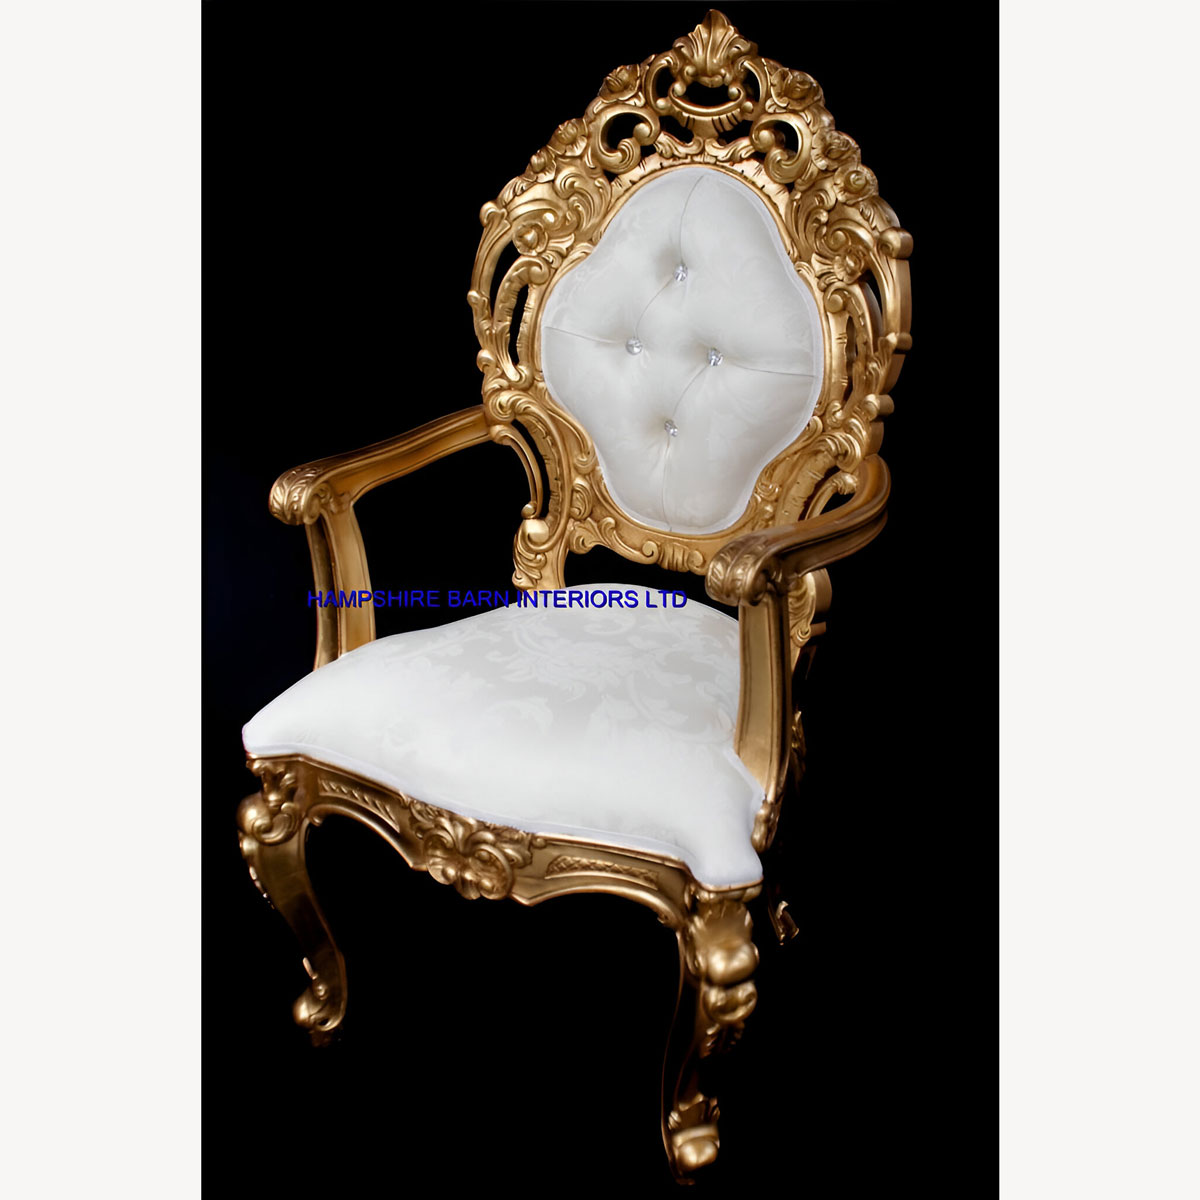 Ornate Royal Palace Throne Chair In Gold Leaf Frame And Ivory Cream Fabric 5 - Hampshire Barn Interiors - Ornate Royal Palace Throne Chair In Gold Leaf Frame And Ivory Cream Fabric -